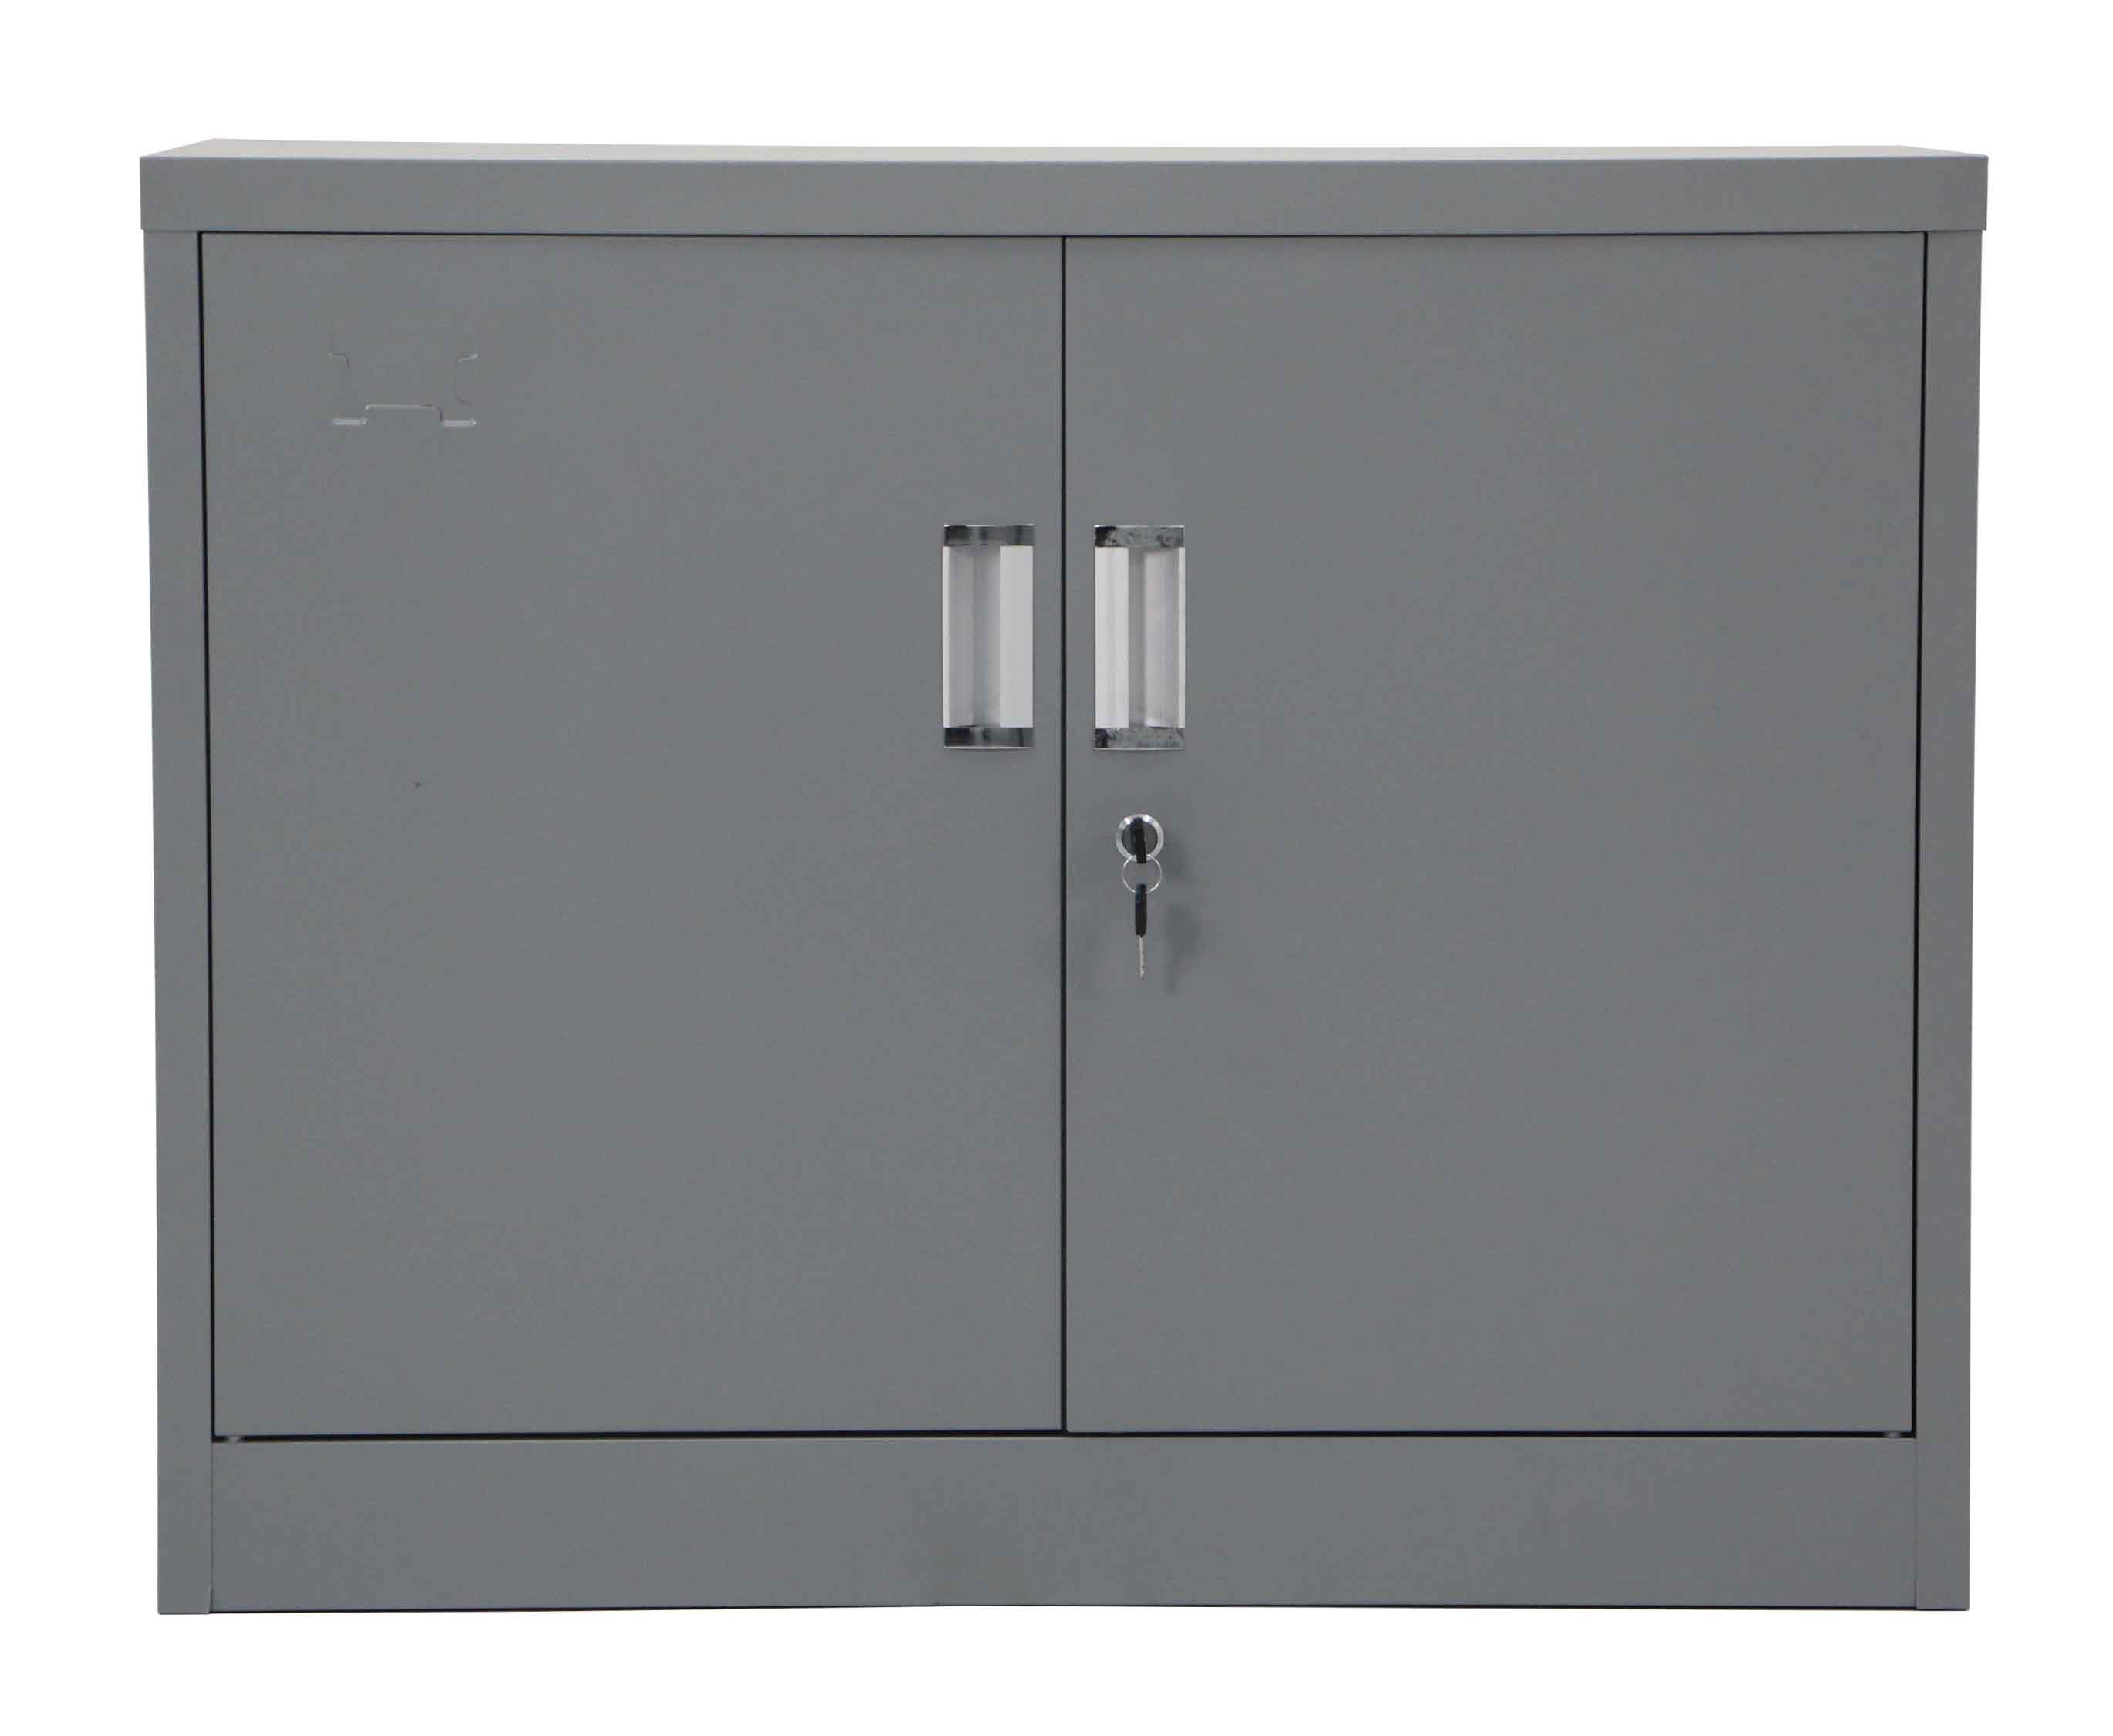 Terri Low Steel Filing Cabinet Dark Grey Furniture Home Dcor pertaining to proportions 2739 X 2250